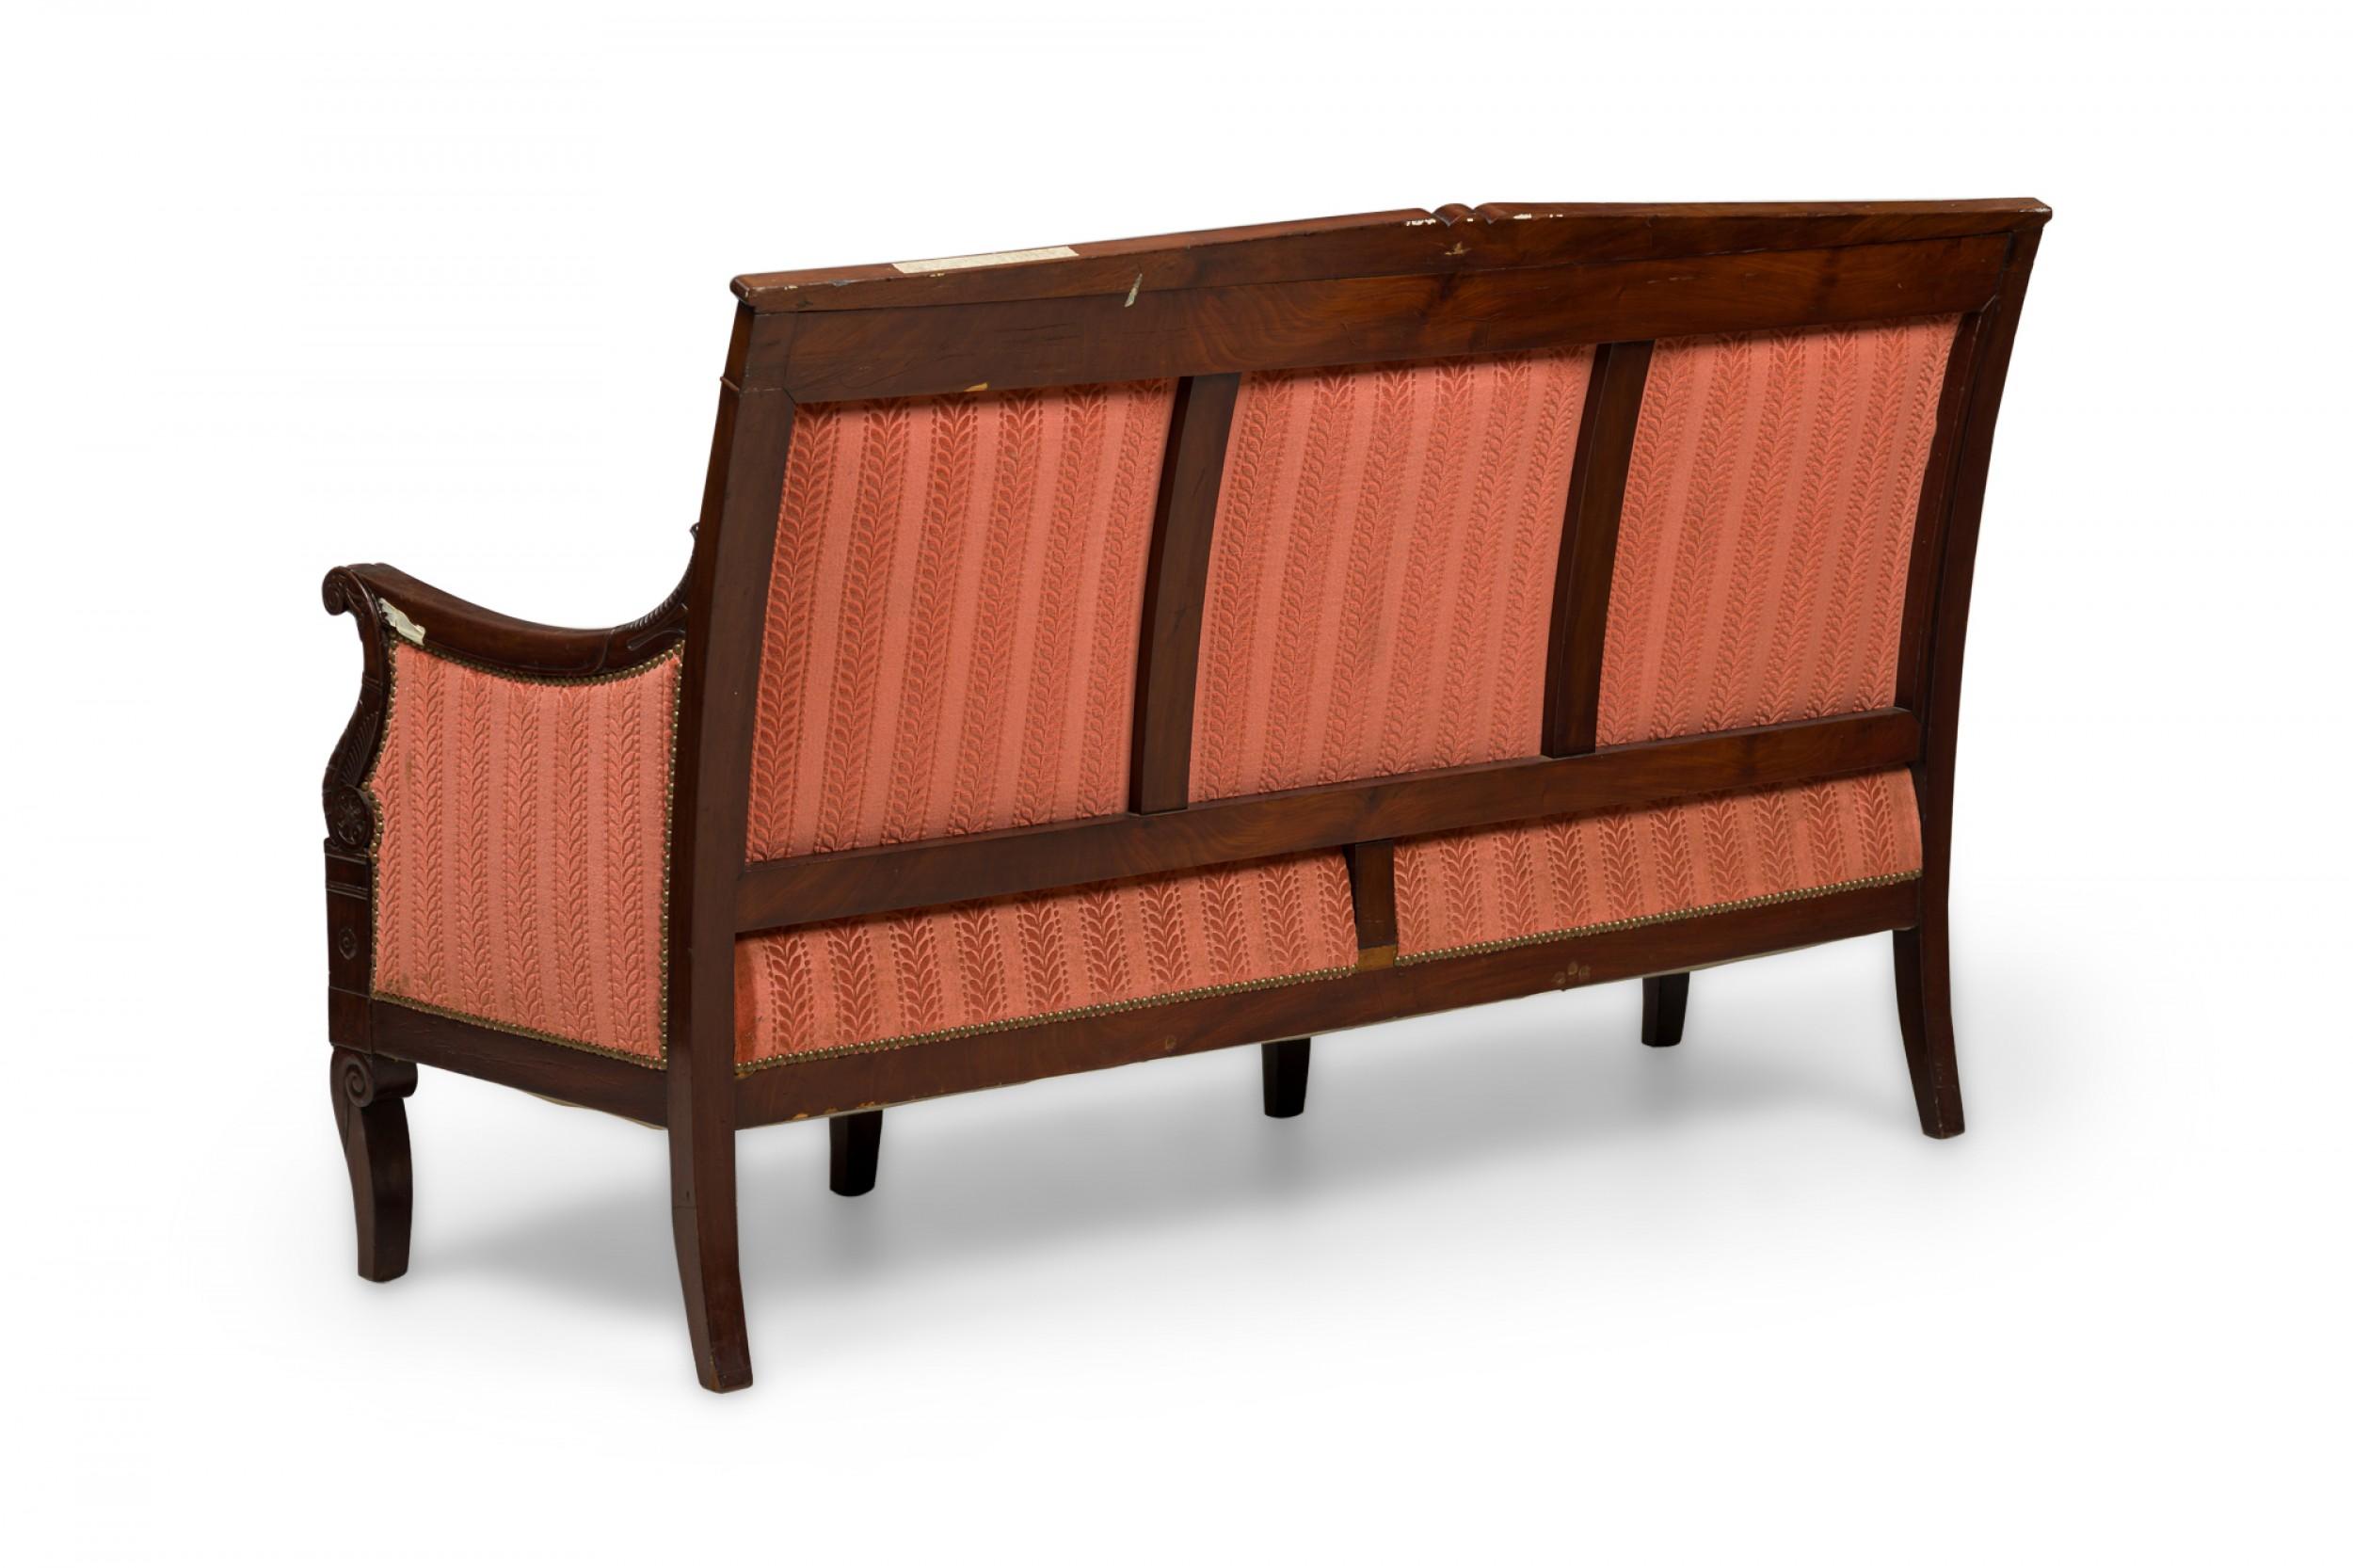 19th Century Bellanger French Empire Mahogany Pink and Red Stripe Upholstered Settee For Sale